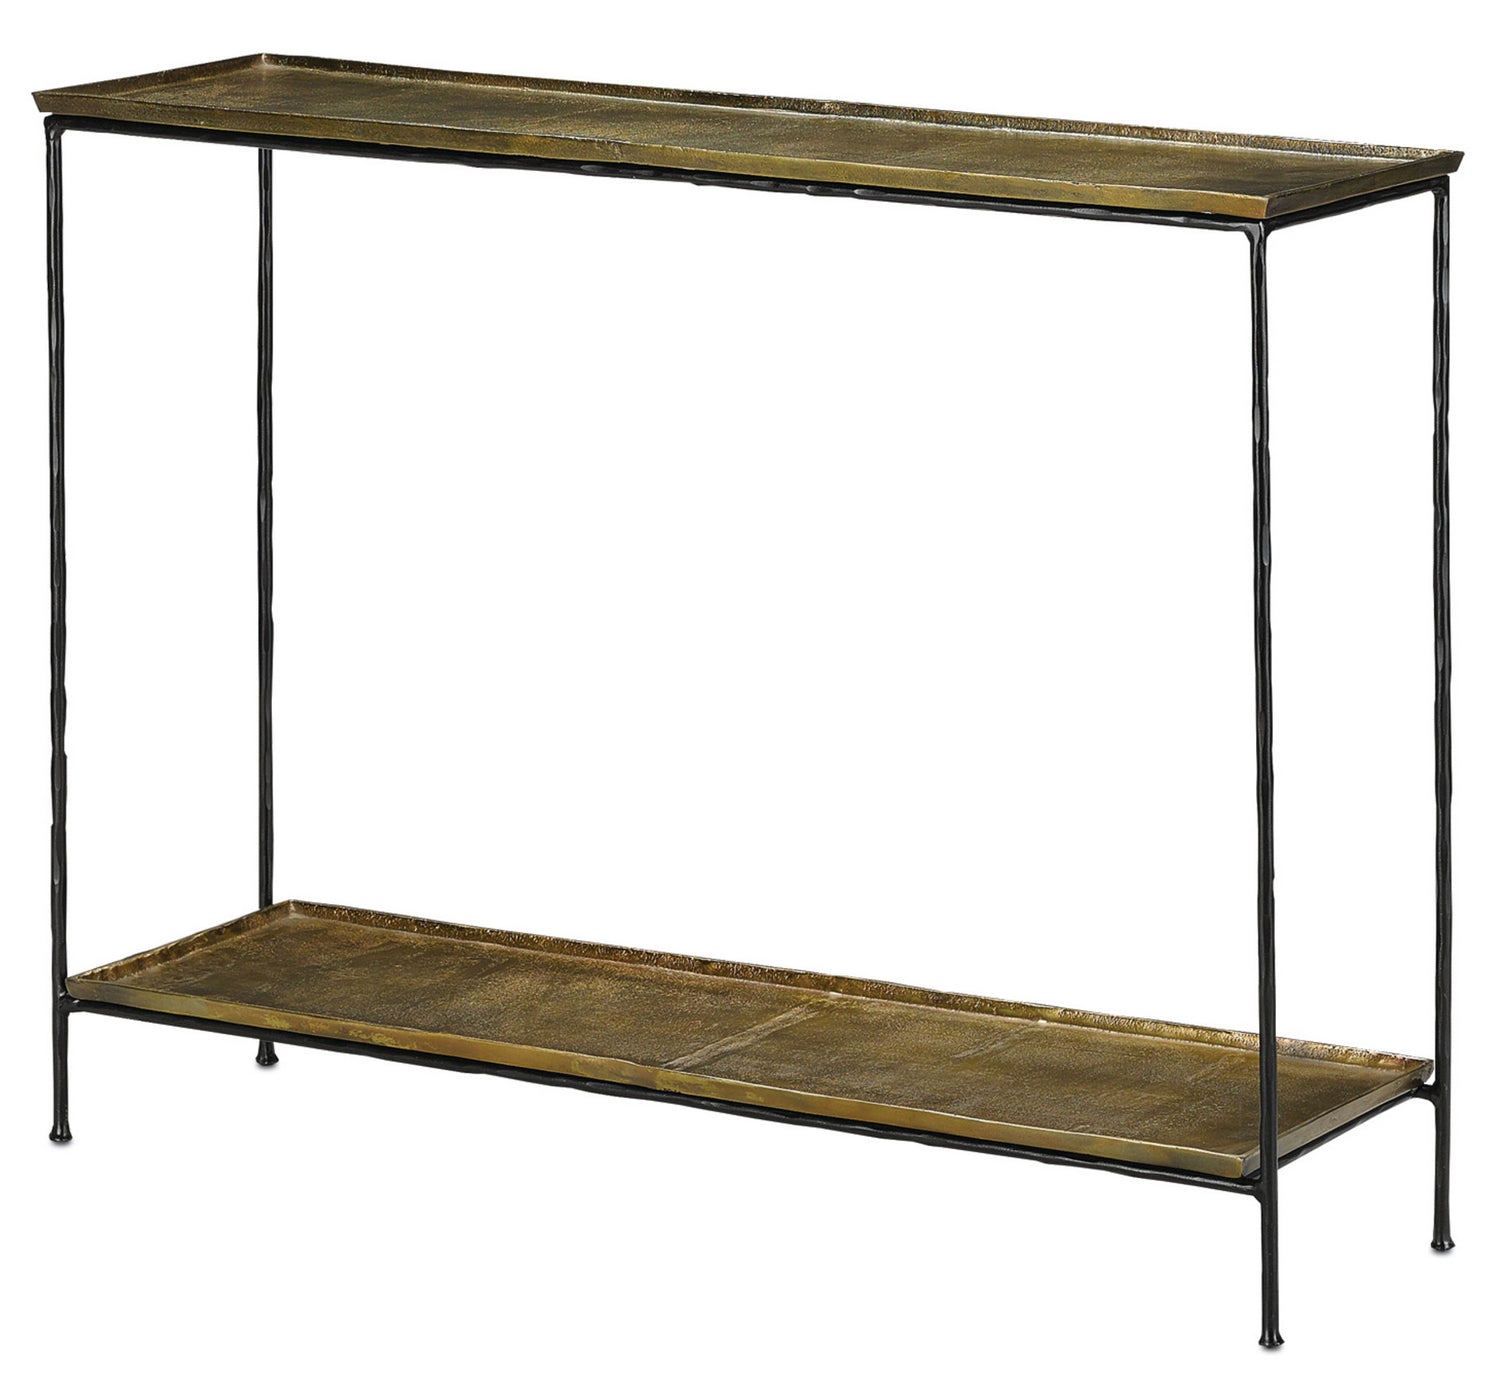 Currey and Company - Console Table - Boyles - Antique Brass/Black- Union Lighting Luminaires Decor